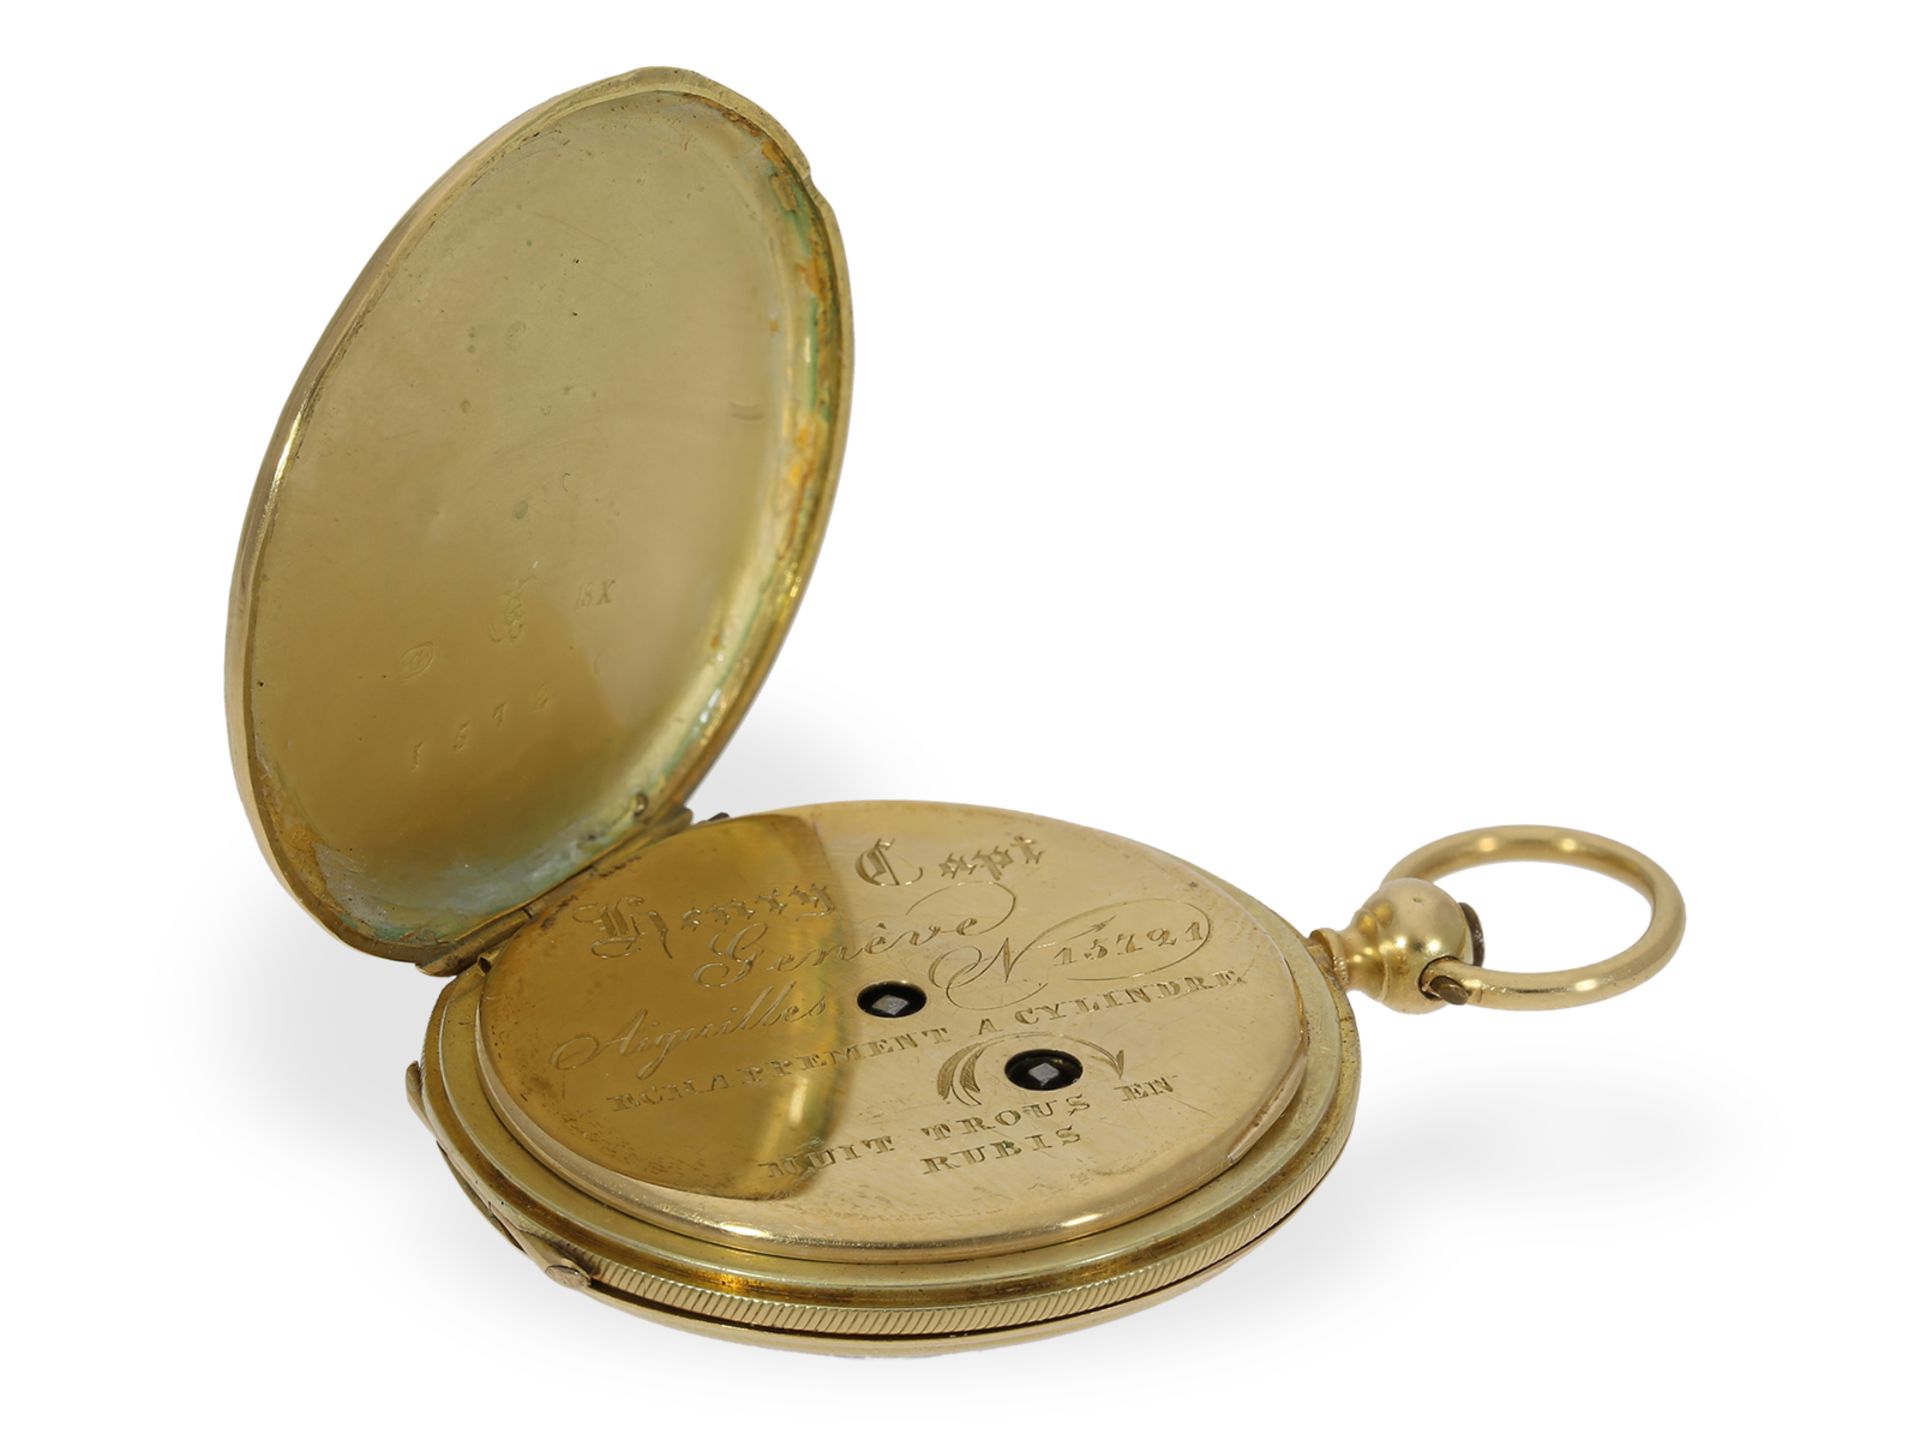 Pocket watch: top-quality gold/enamel hunting case watch, Henry Capt Geneve, ca. 1830 - Image 9 of 10